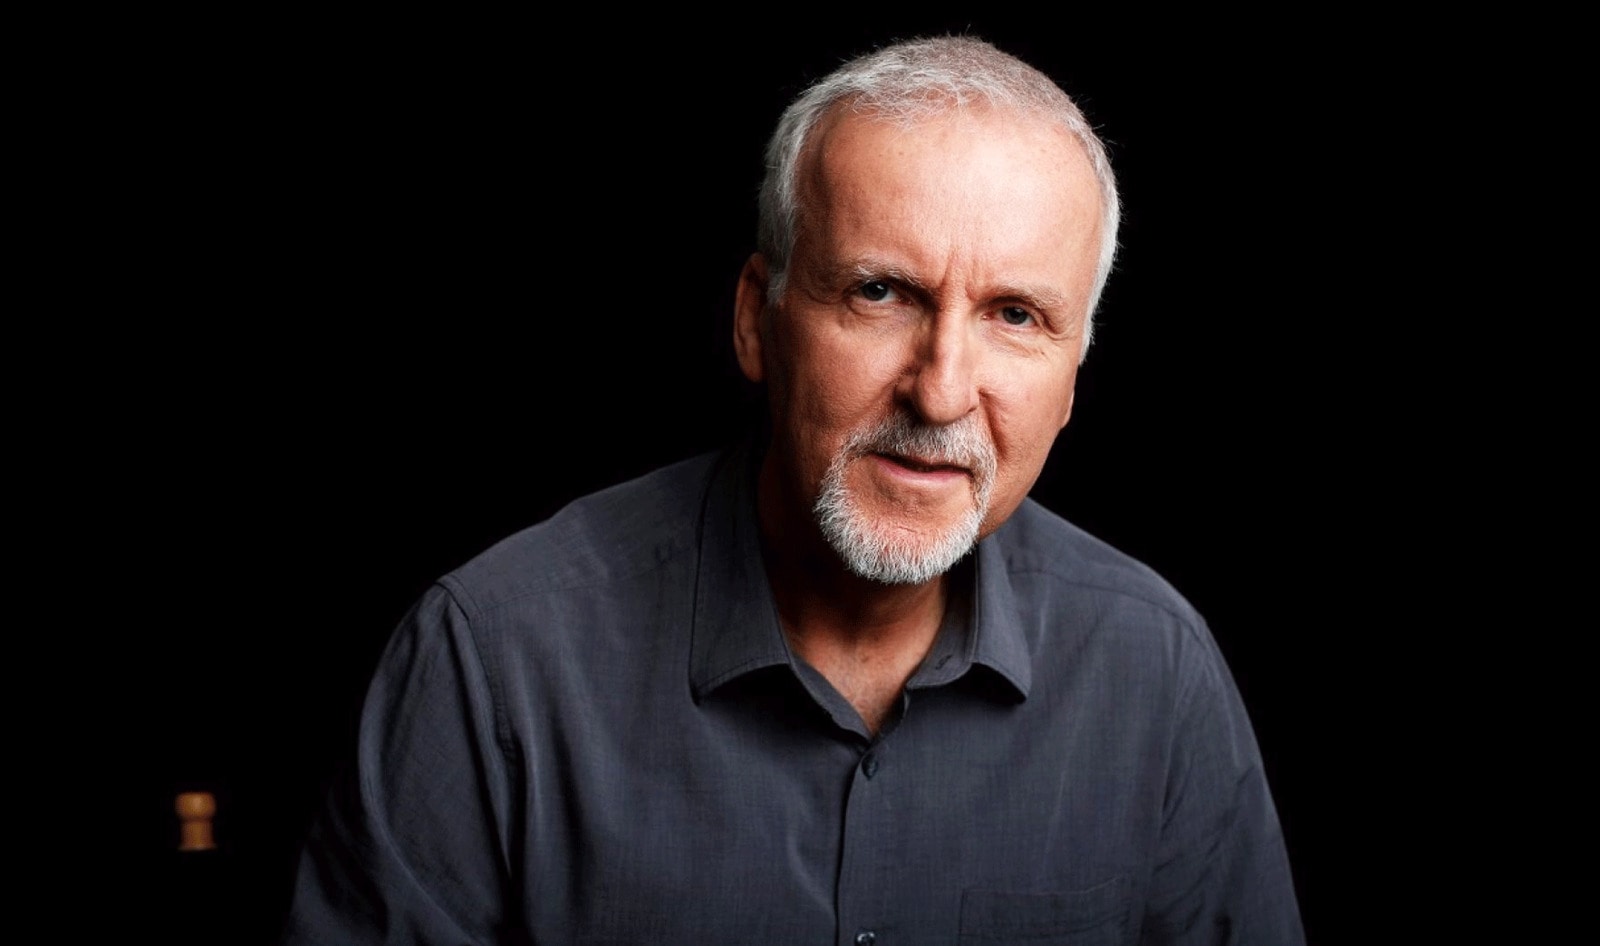 James Cameron’s Financial Advisor: “Plant-Based Food Is The Internet of 1994”